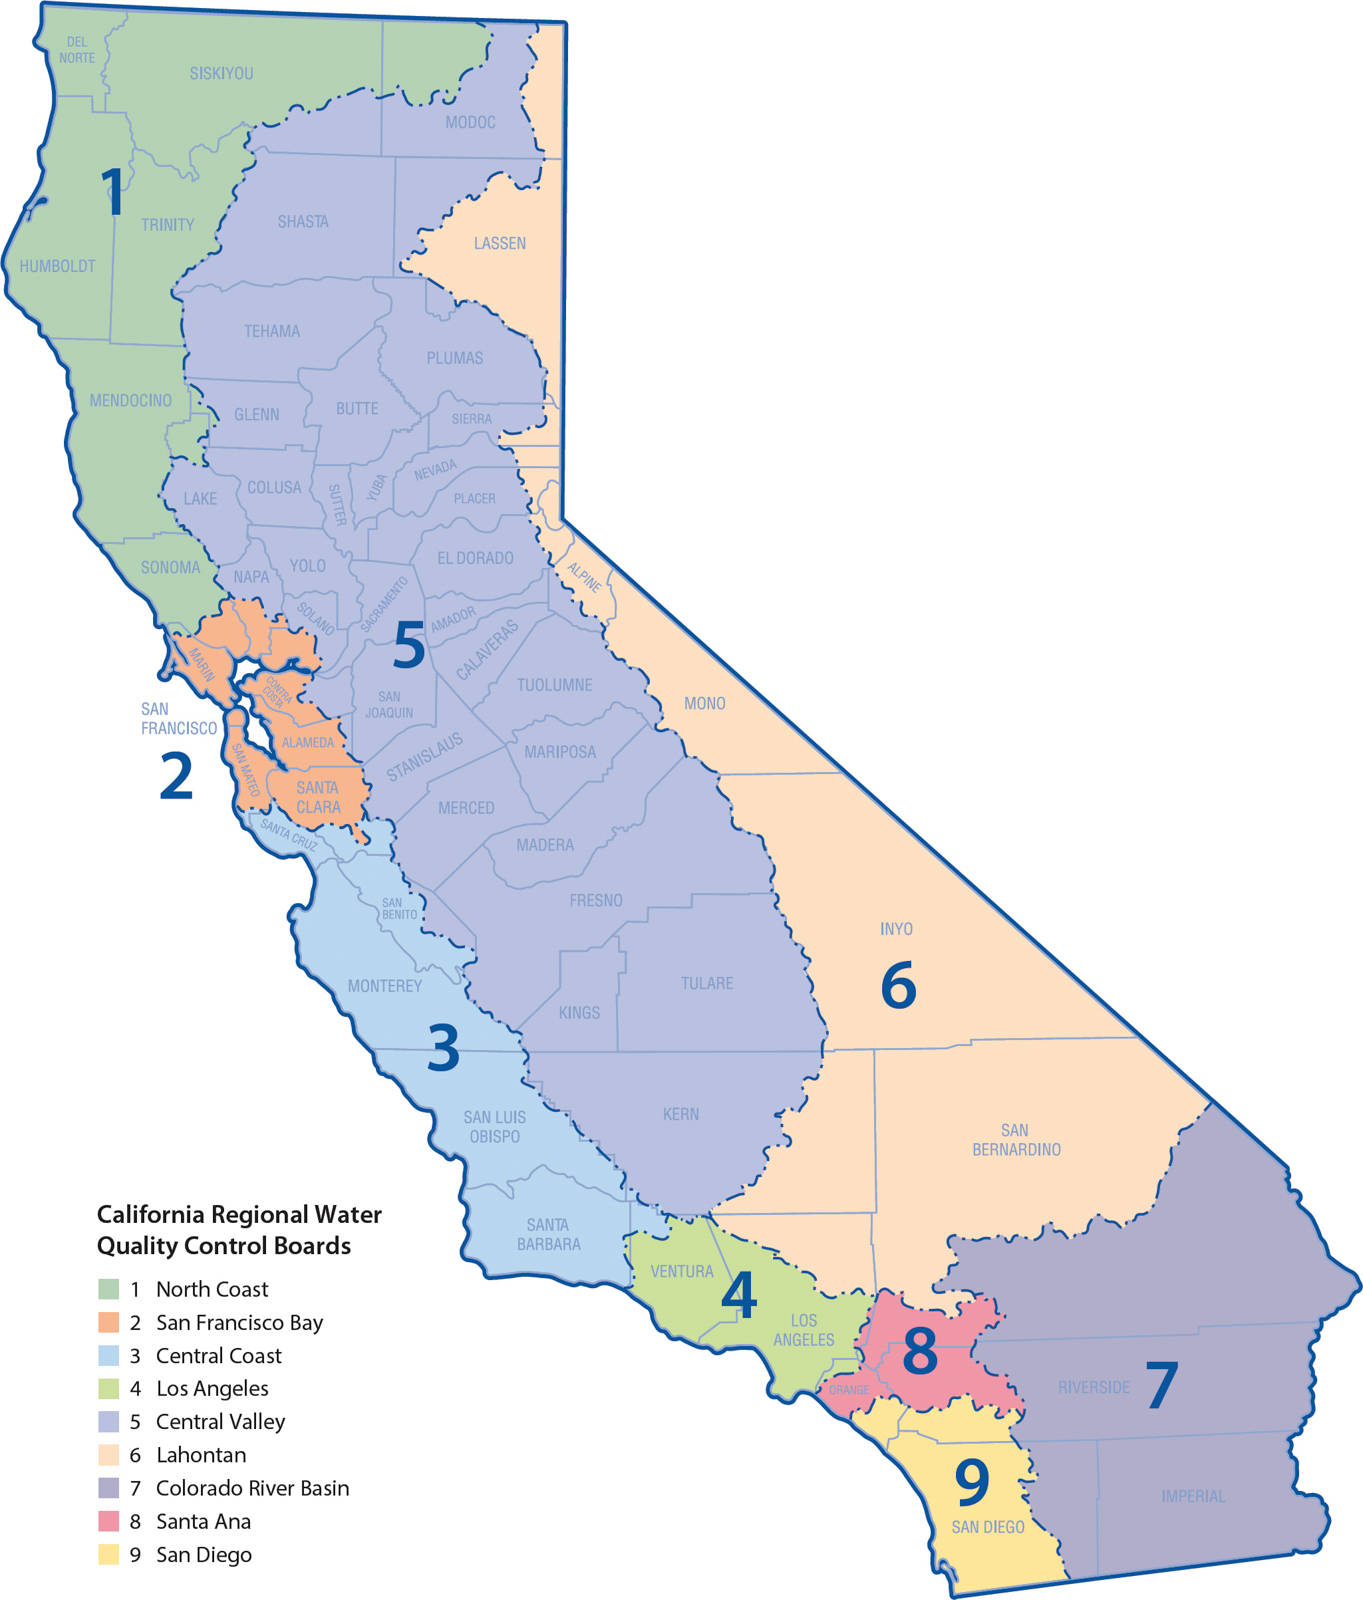 The Central Coast Regional Water Quality Control Board is one of nine statewide; each water quality control board issues permits and enforces requirements at the local level. Map of California regional water quality control boards adapted from California Water Boards brochure (revised May 2013).